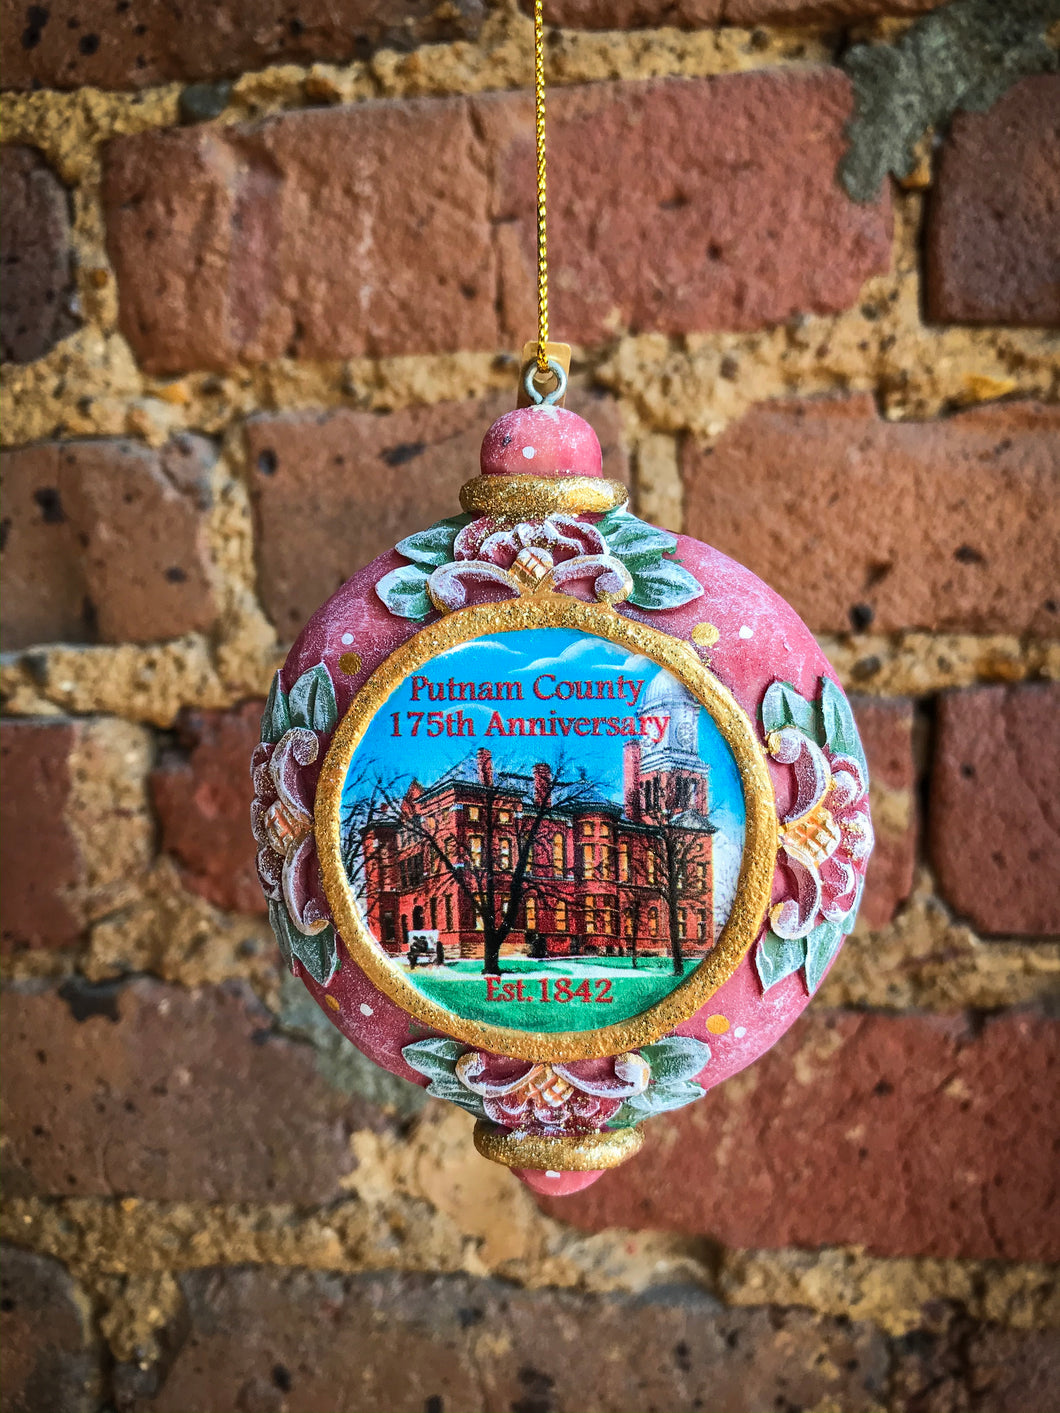 Putnam County Courthouse 175th Anniversary Ornament